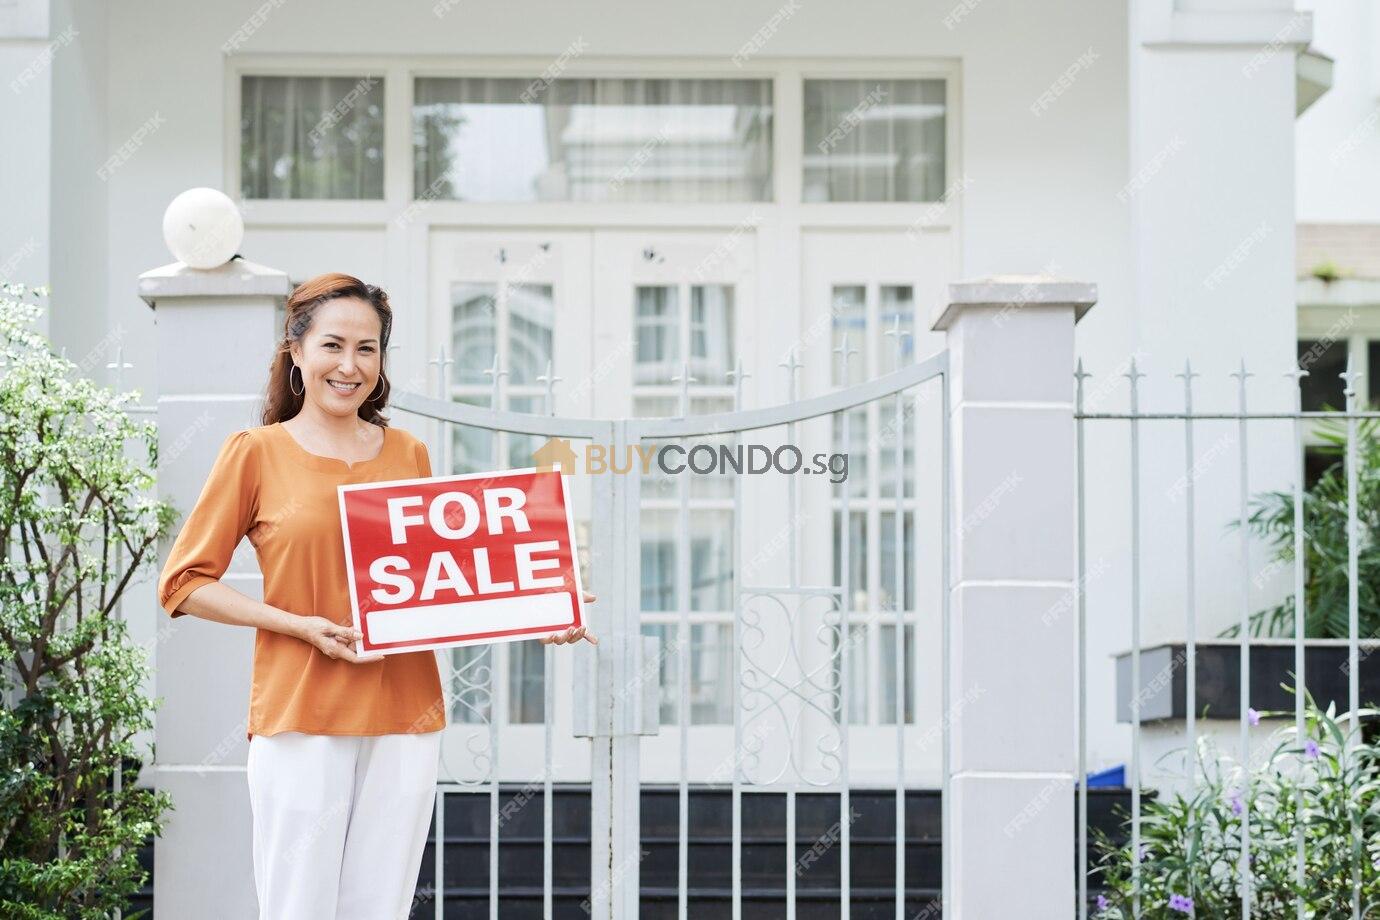 Which Property Agent is Good?